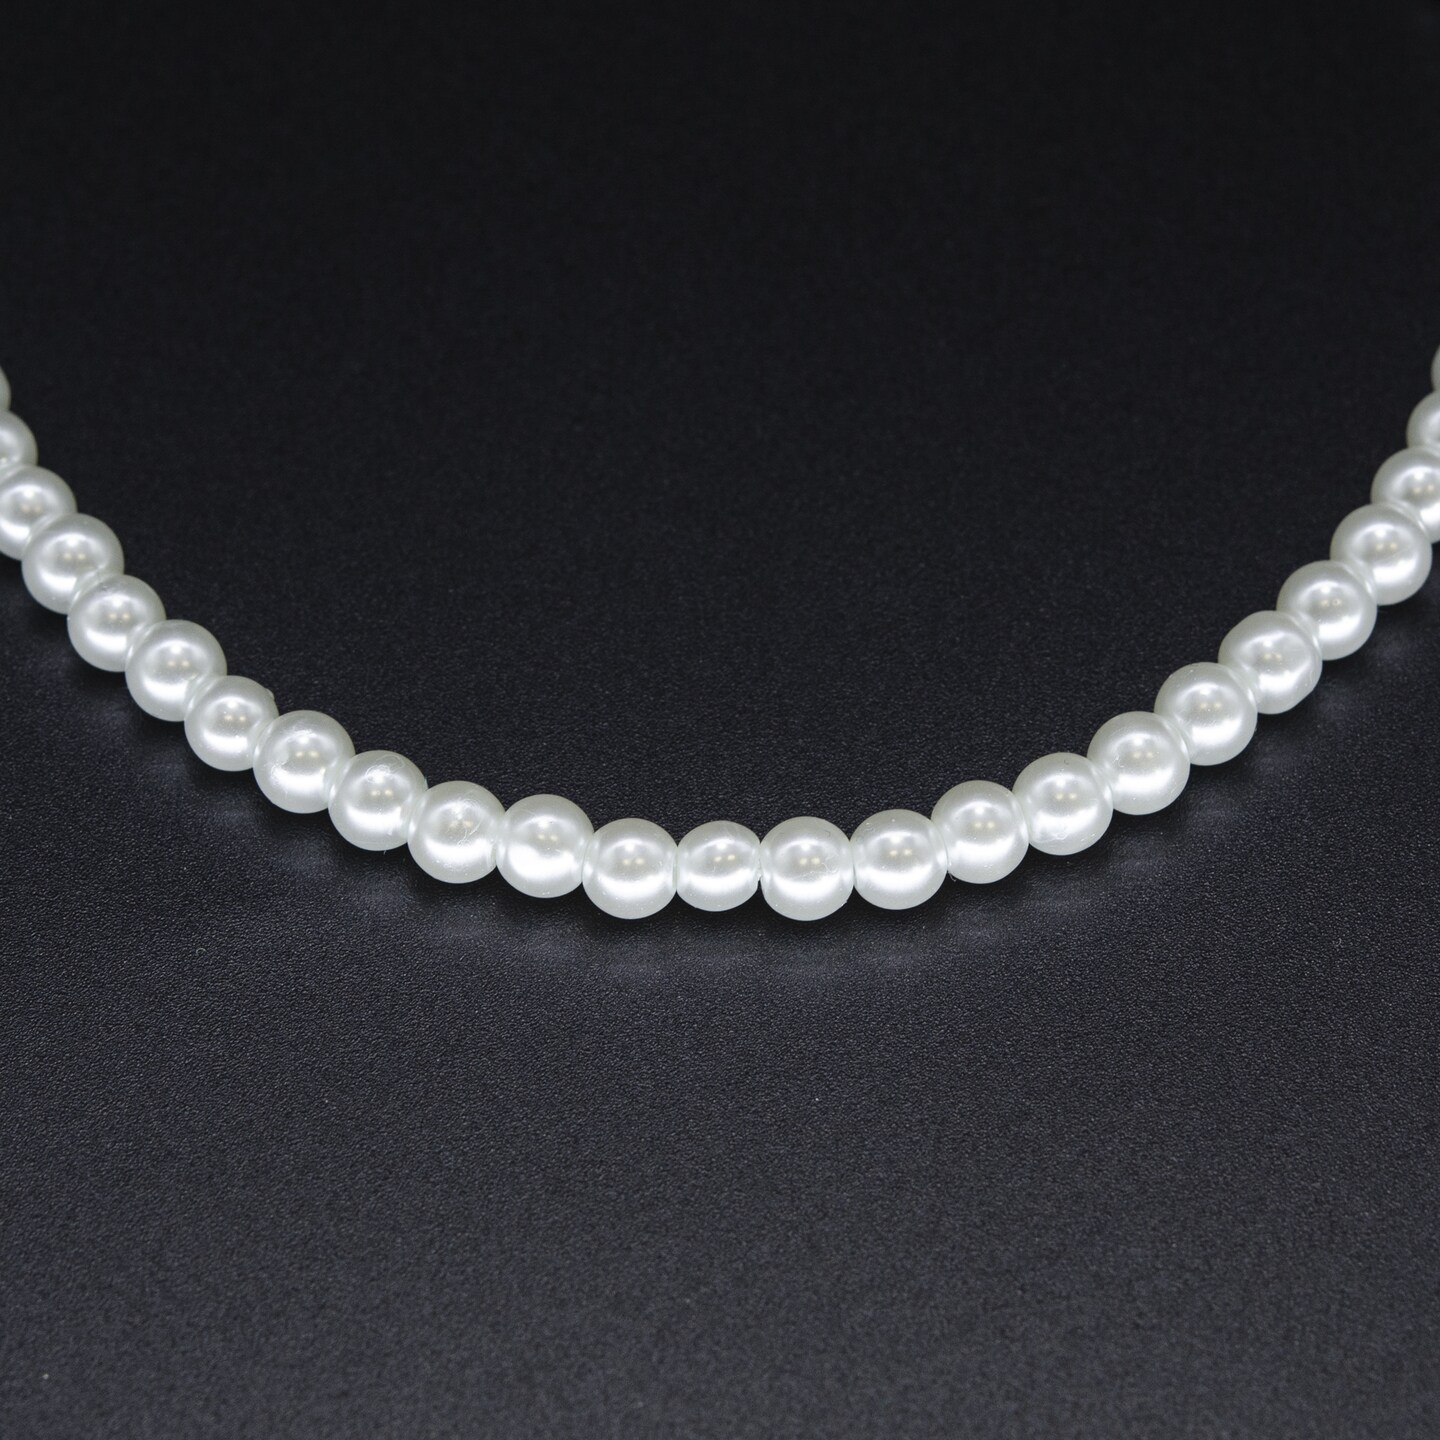 4 Strands of 6mm White Glass Pearl Beads on 30-Inch Strands